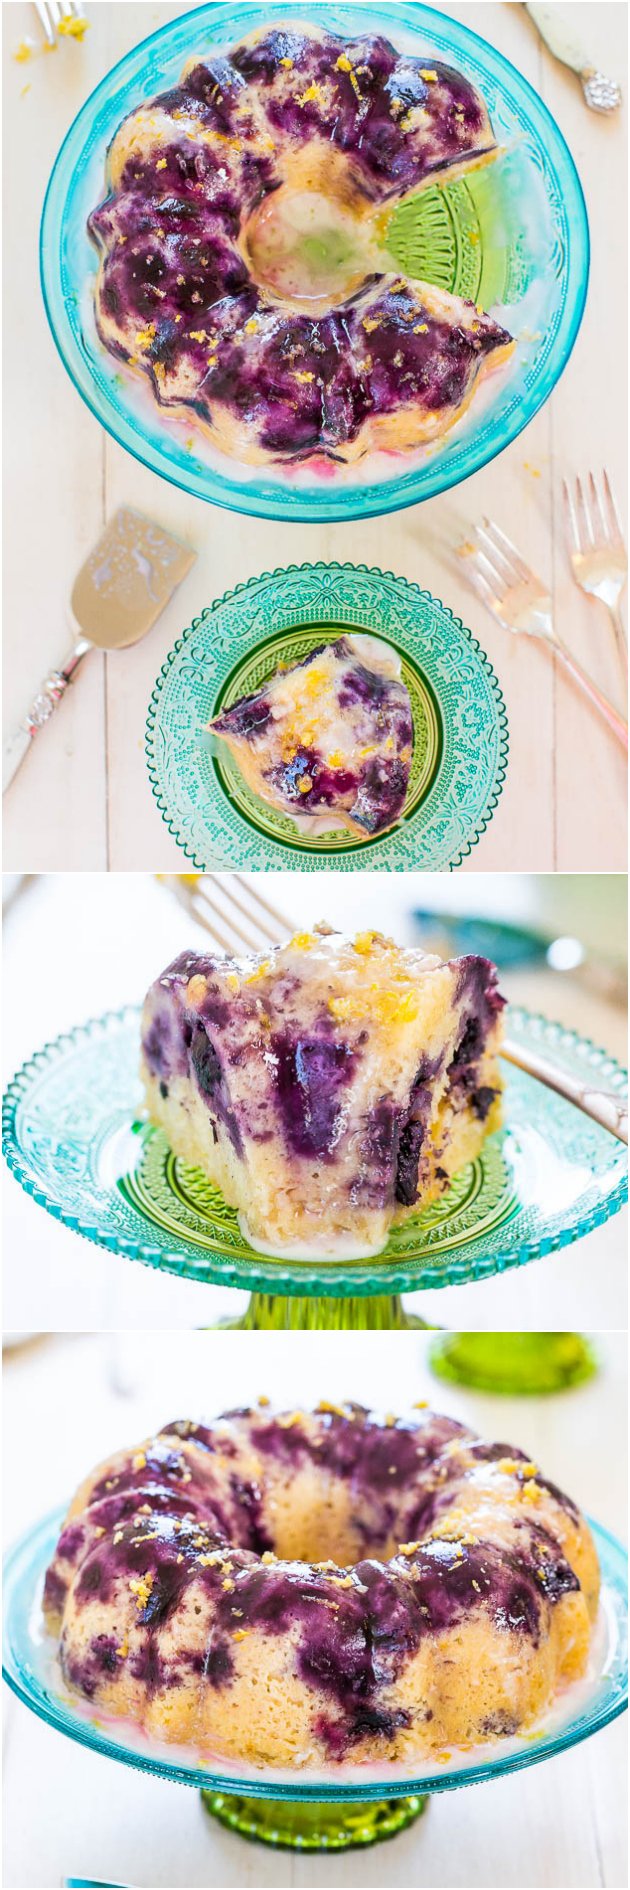 Blueberry Lemon Cake with Lemon Glaze - Almost more berries than cake in this soft, fluffy cake! The lemon glaze is plate-licking delish!!